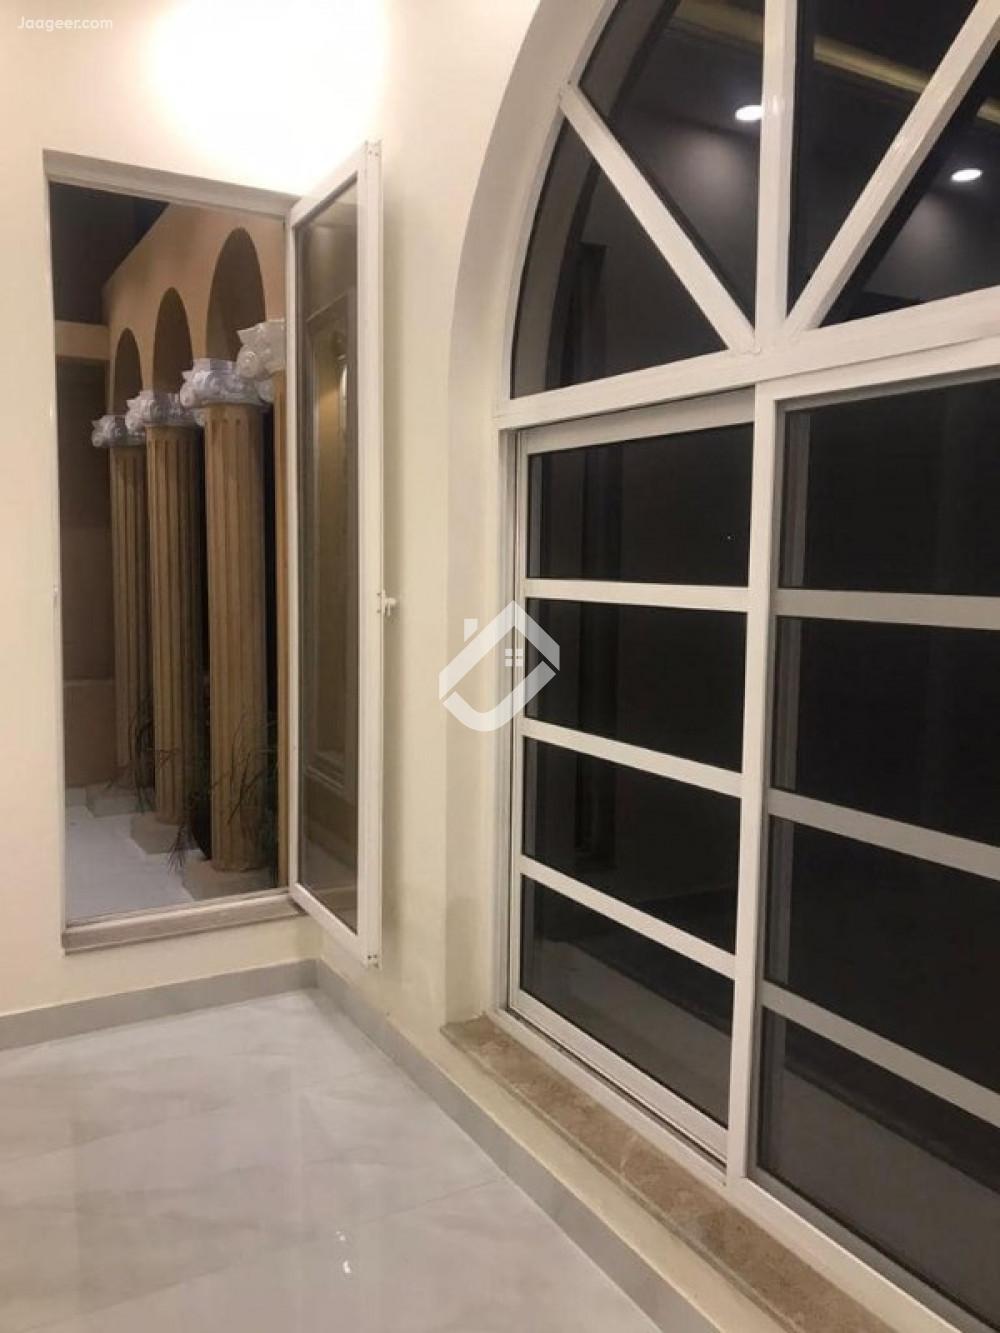 View  10 Marla Furnished Upper Portion House For Rent In Paragon City  in Paragon City, Lahore